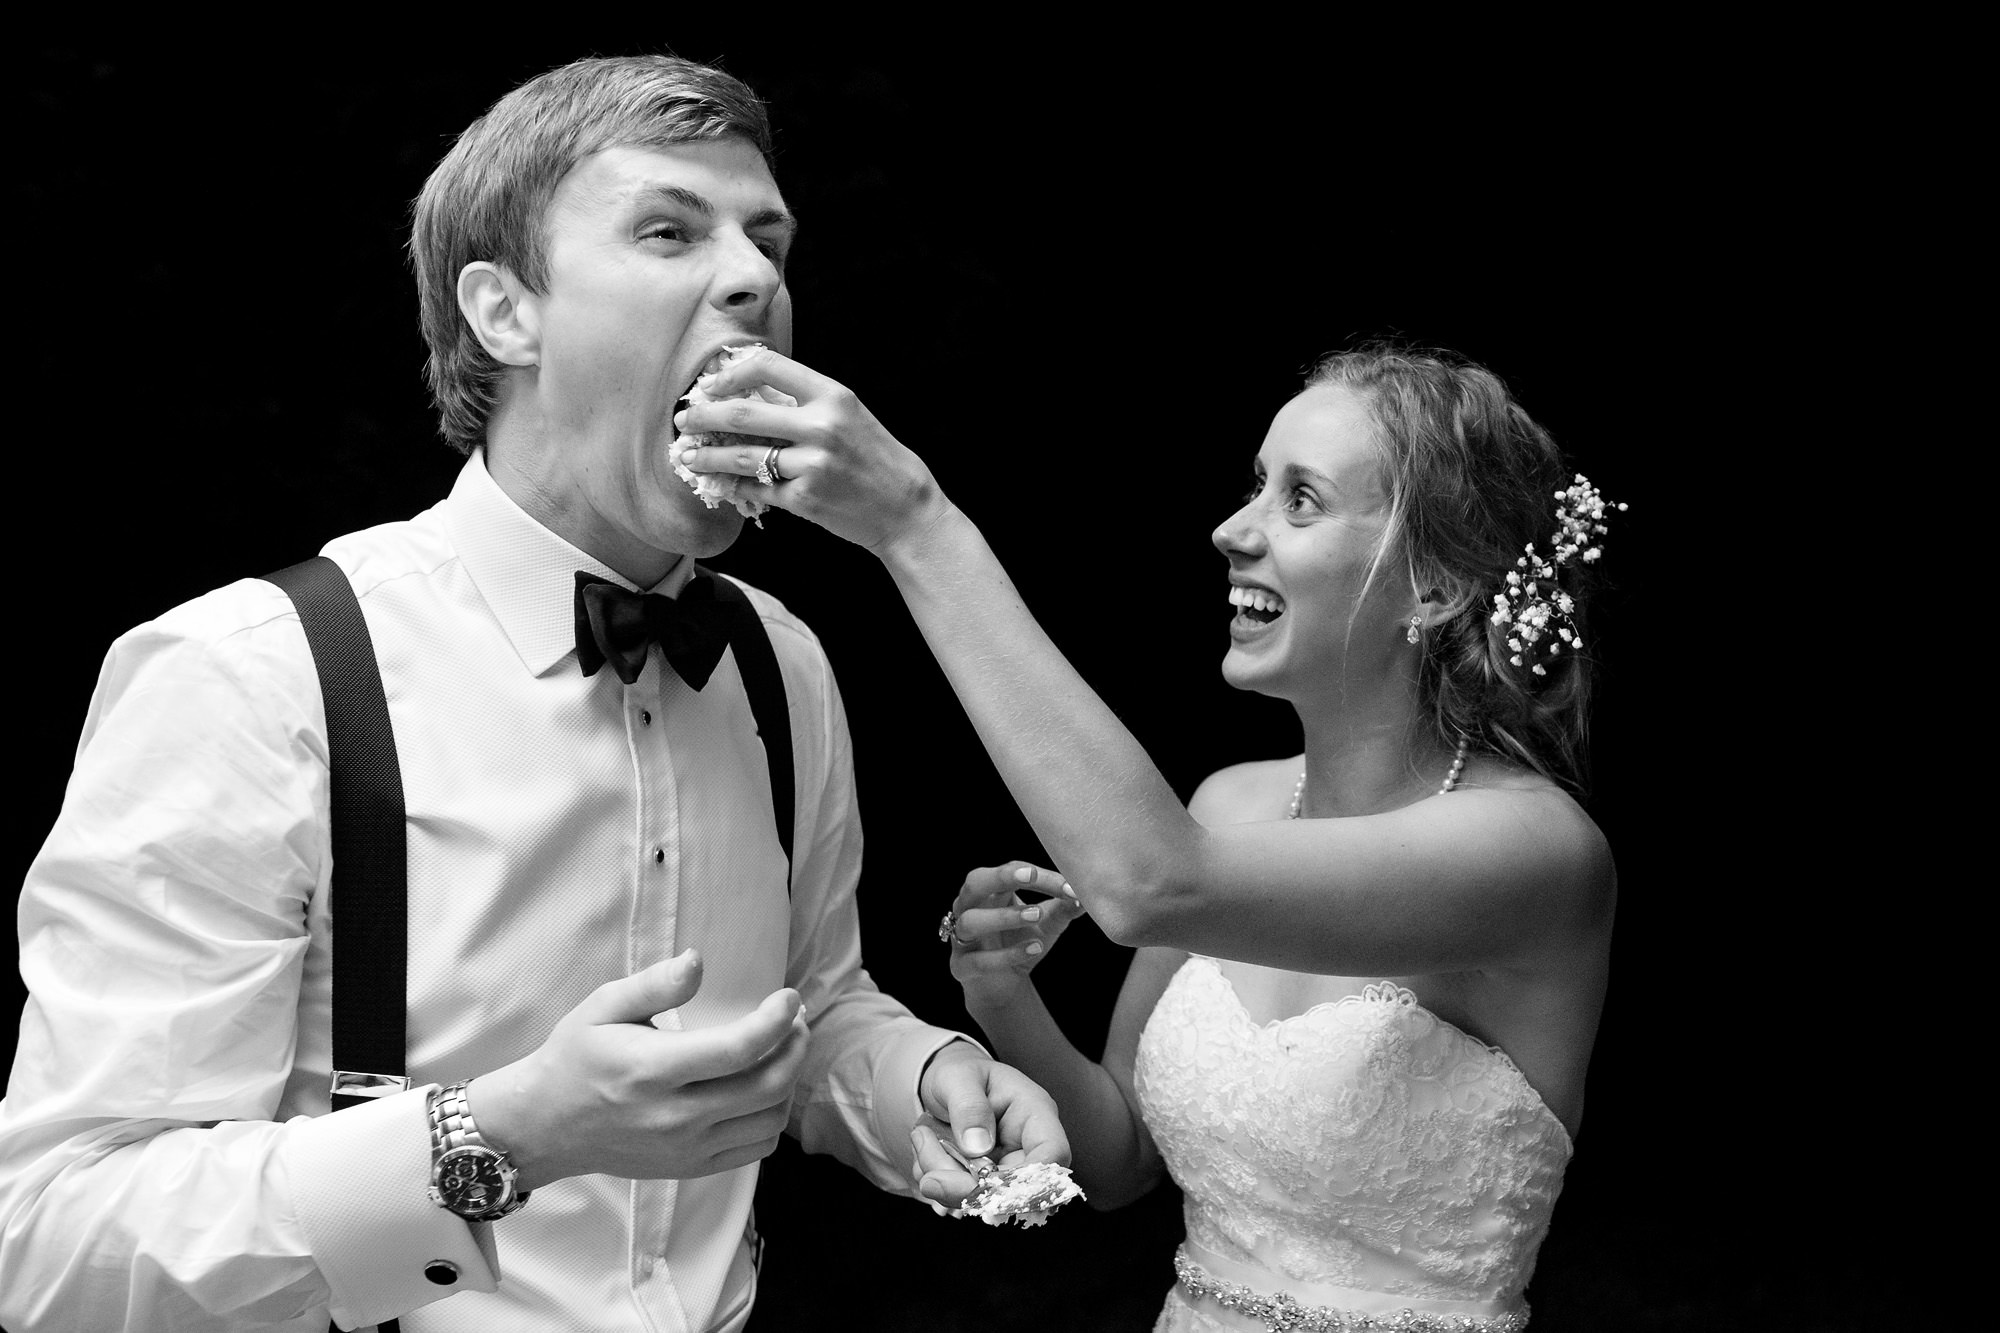 The bride shoves cake into the groom's face at their wedding.